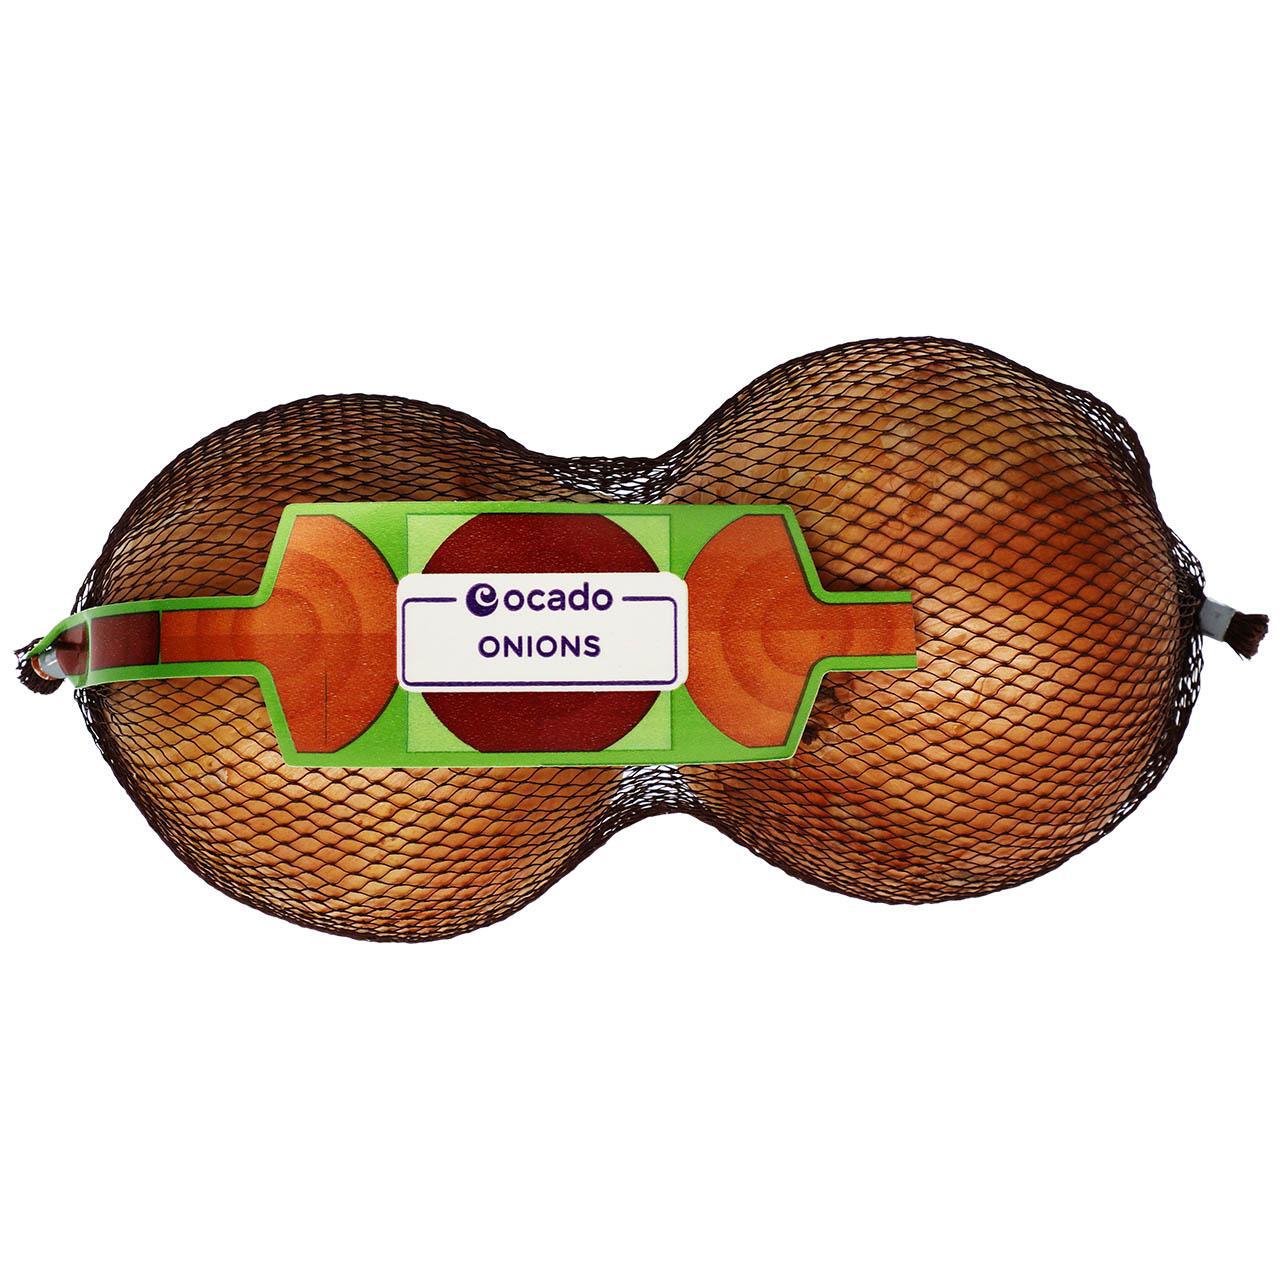 Ocado Extra Large Brown Onions 2 per pack